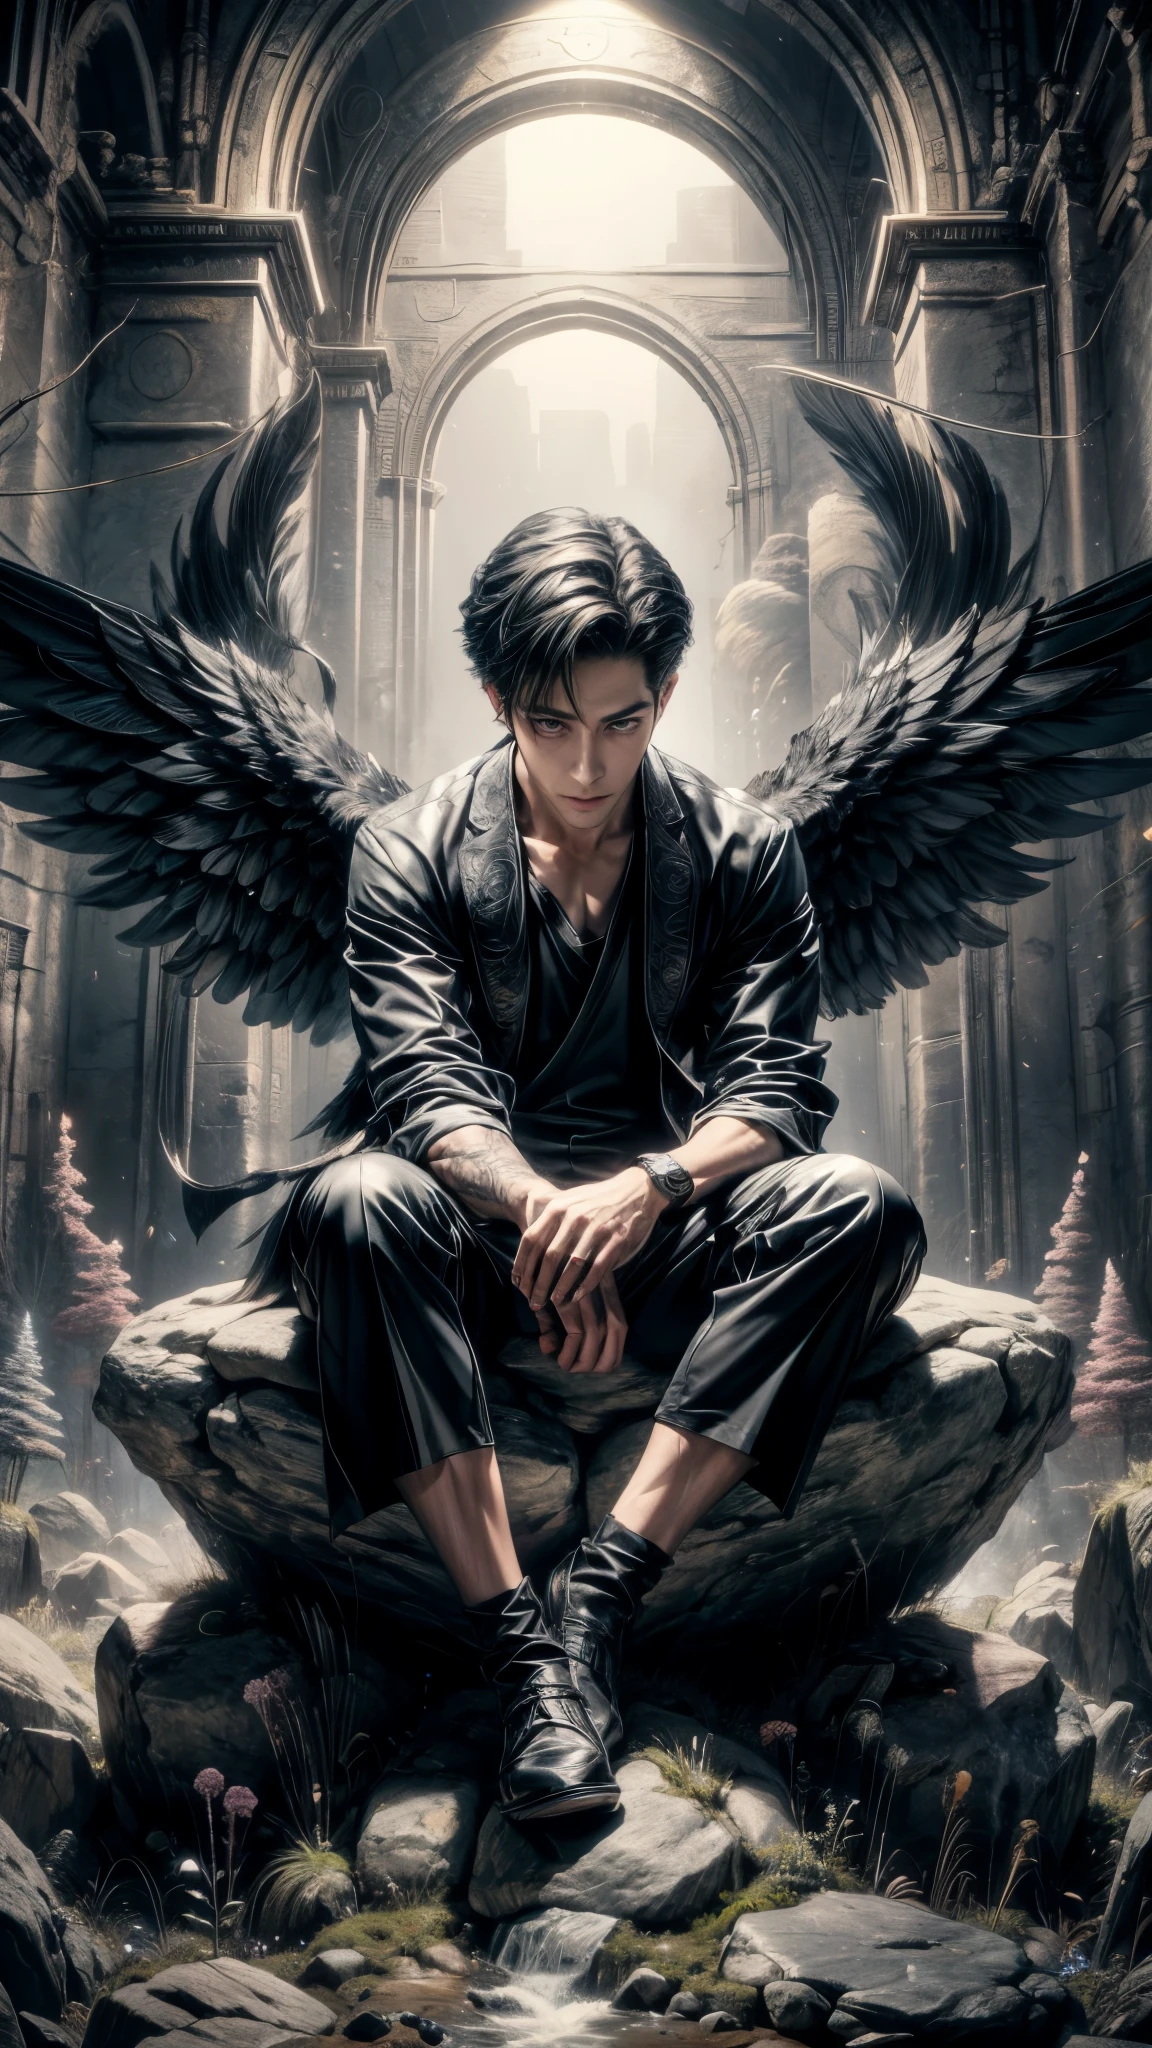 anime - style illustration of a man with wings sitting on a rock, winged boy, 4 k manga wallpaper, winged human, 4k anime wallpaper, black wings instead of arms, anime wallaper, anime art wallpaper 4k, anime art wallpaper 4 k, anime art wallpaper 8 k, dark feathered wings, young wan angel, low angel, anime wallpaper 4k